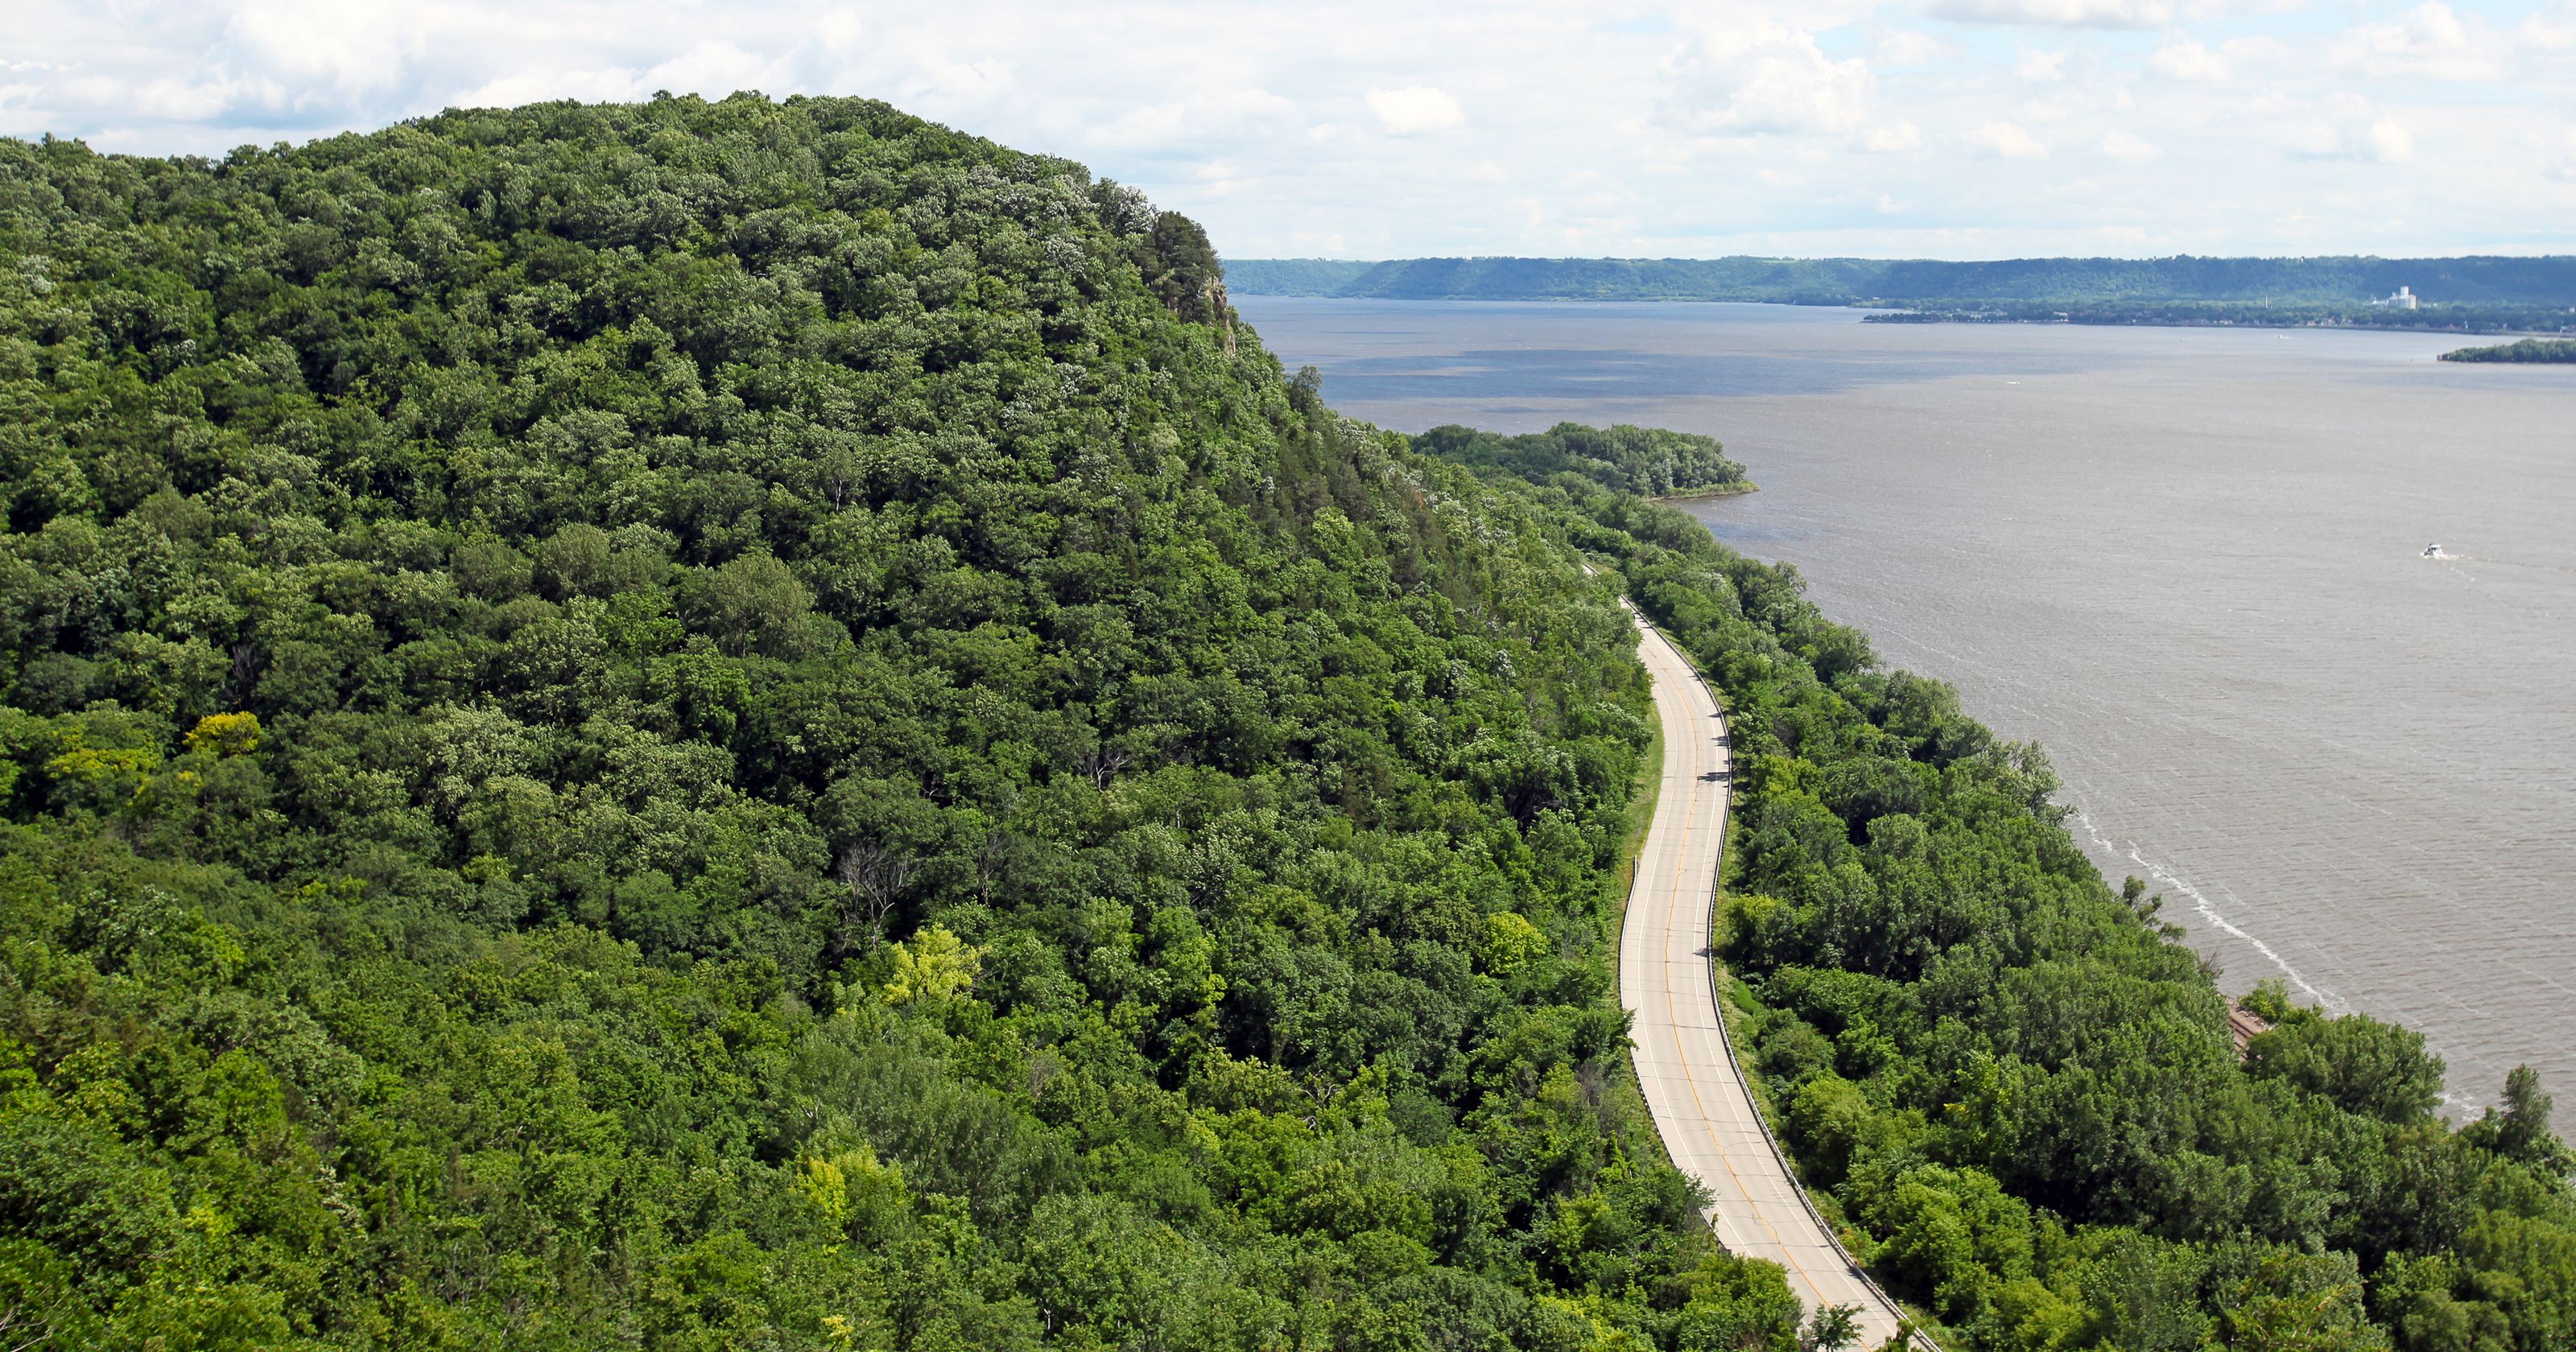 Maiden Rock Bluff offers some of the best views along the Great ...